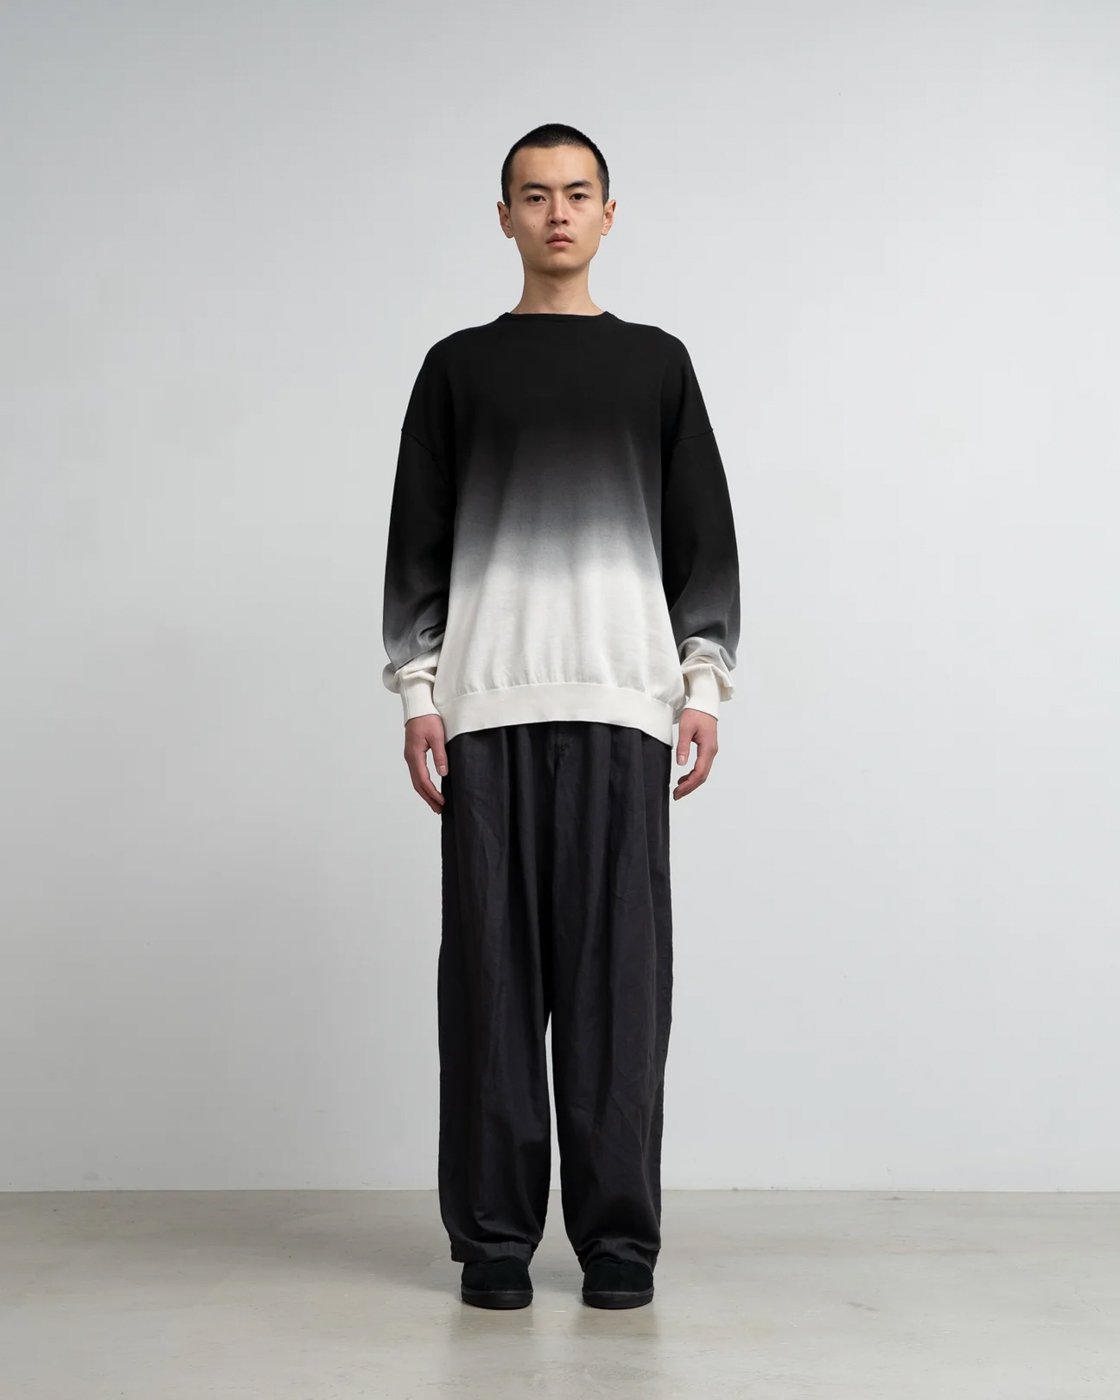 Graphpaper * Piece Dyed High Gauge Knit Oversized Crew Neck * Black Shade